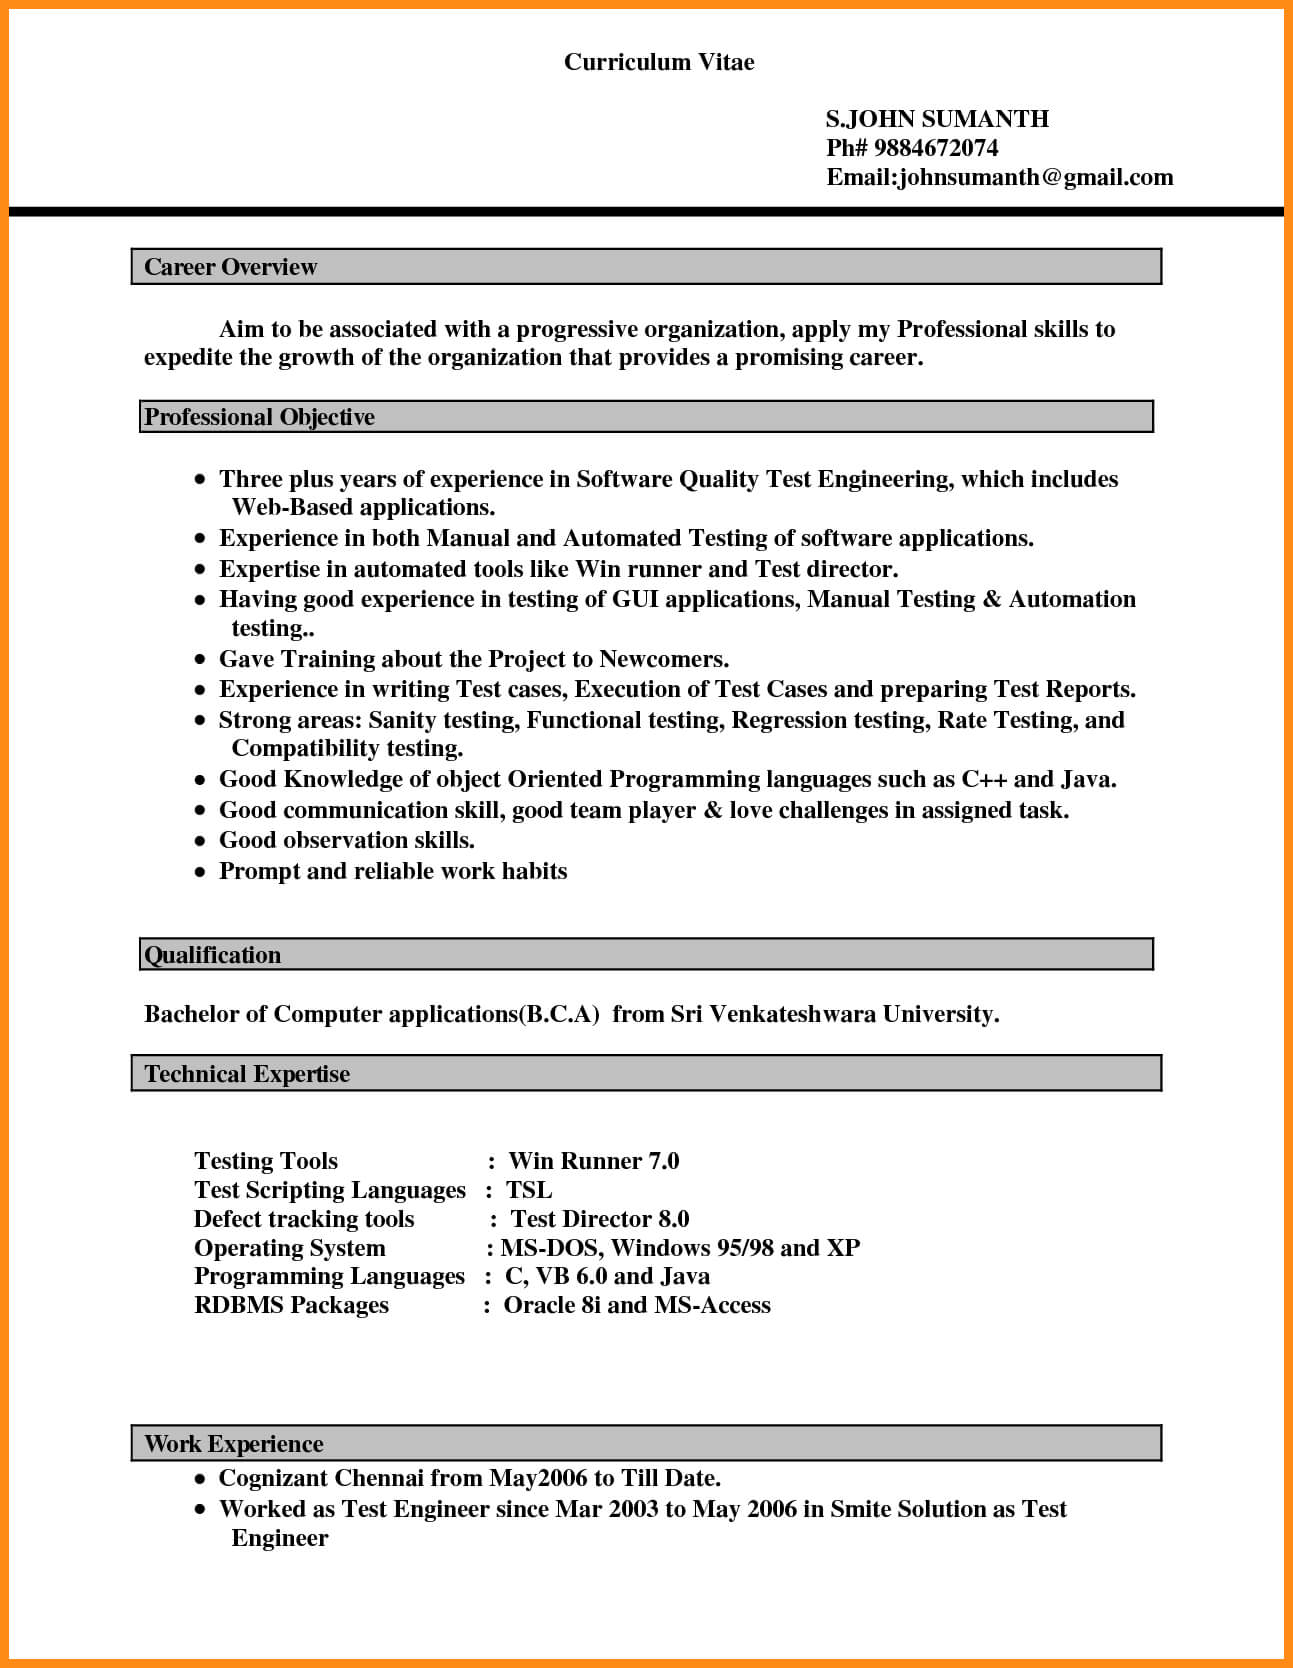 6+ Download Resume Templates Microsoft Word 2007 | Odr2017 Pertaining To Resume Templates Word 2007